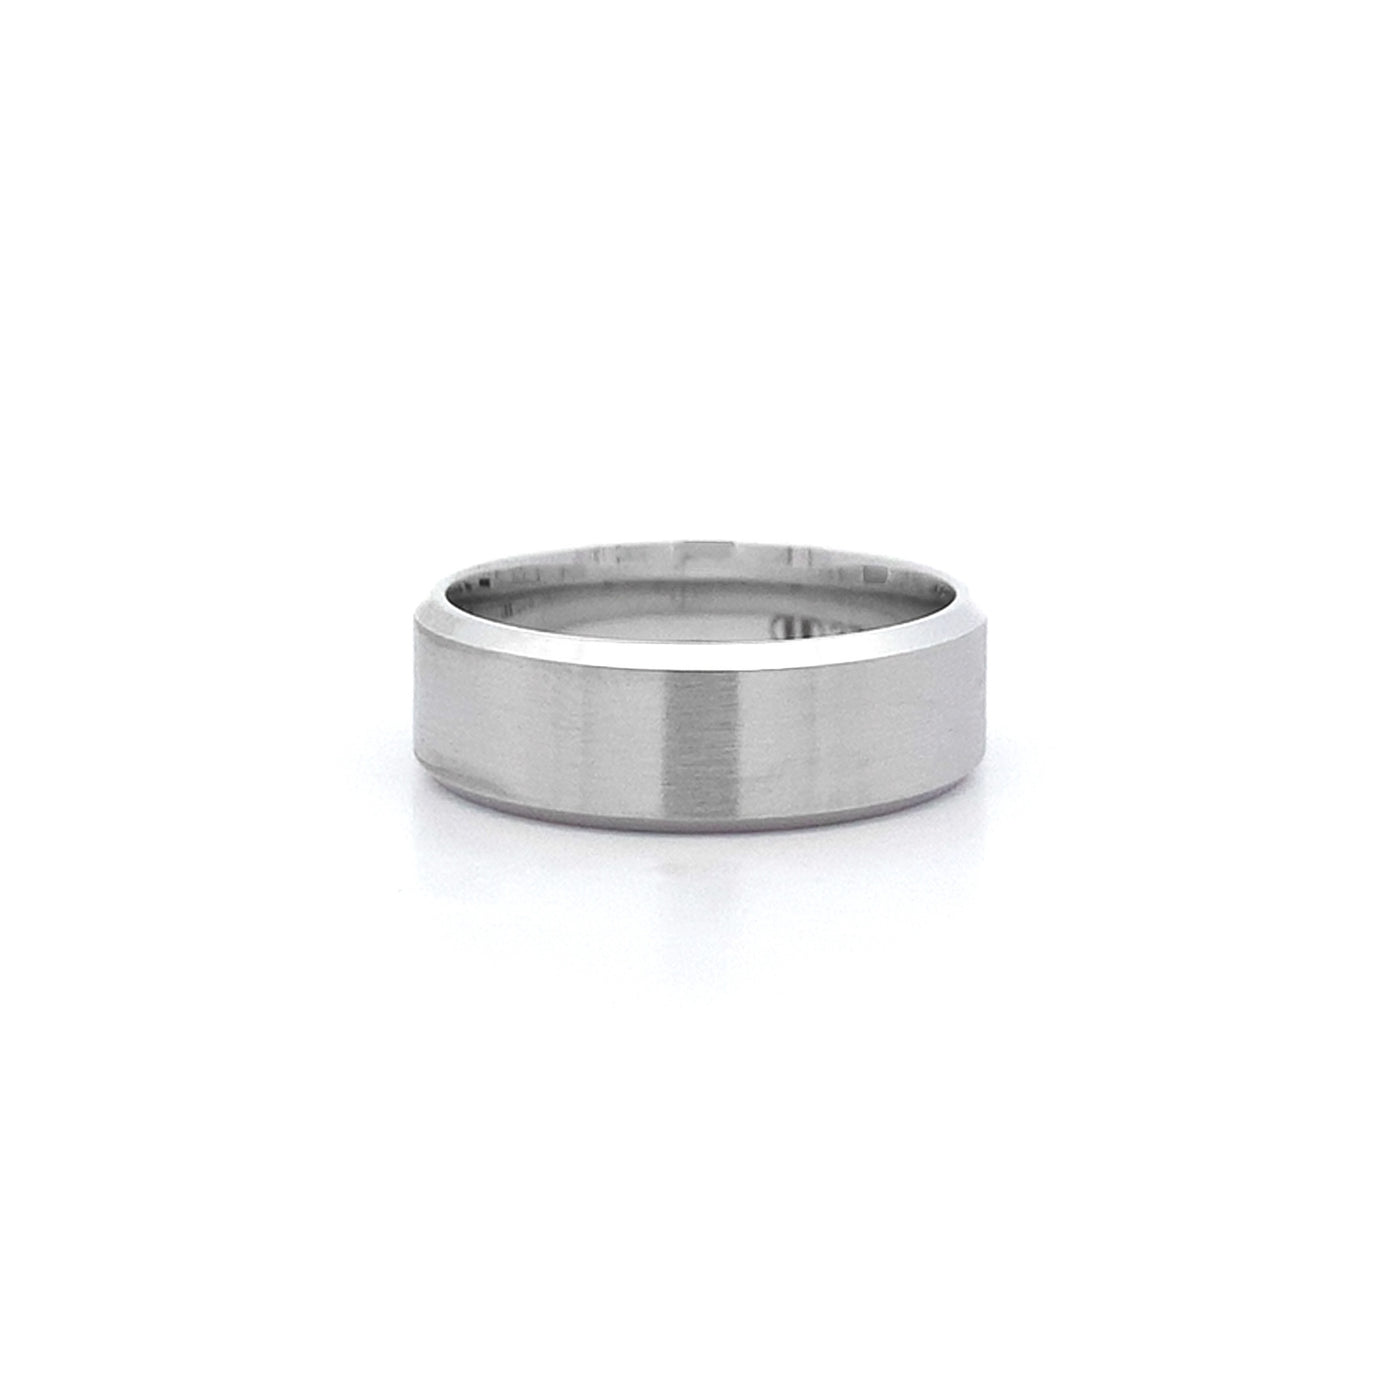 Bevel Edge 7.0mm Band in White Gold